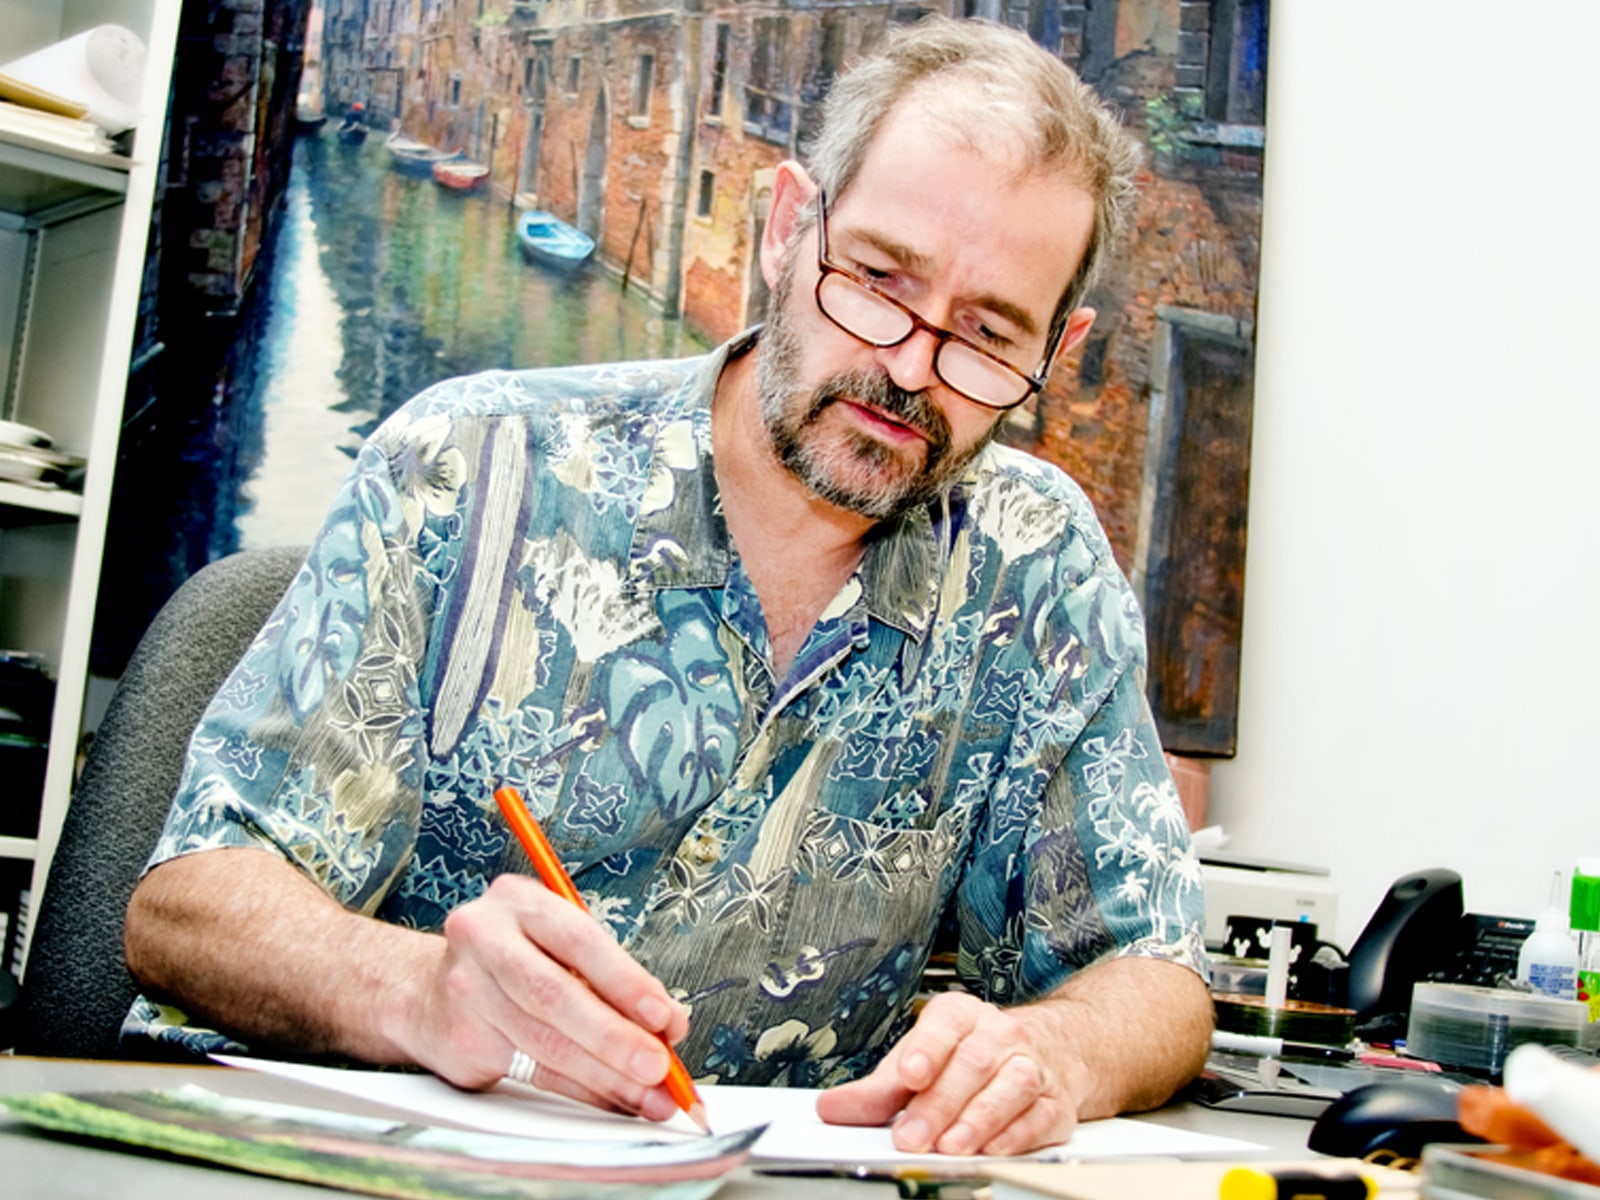 DigiPen art instructor Peter Moehrle drawing in his office